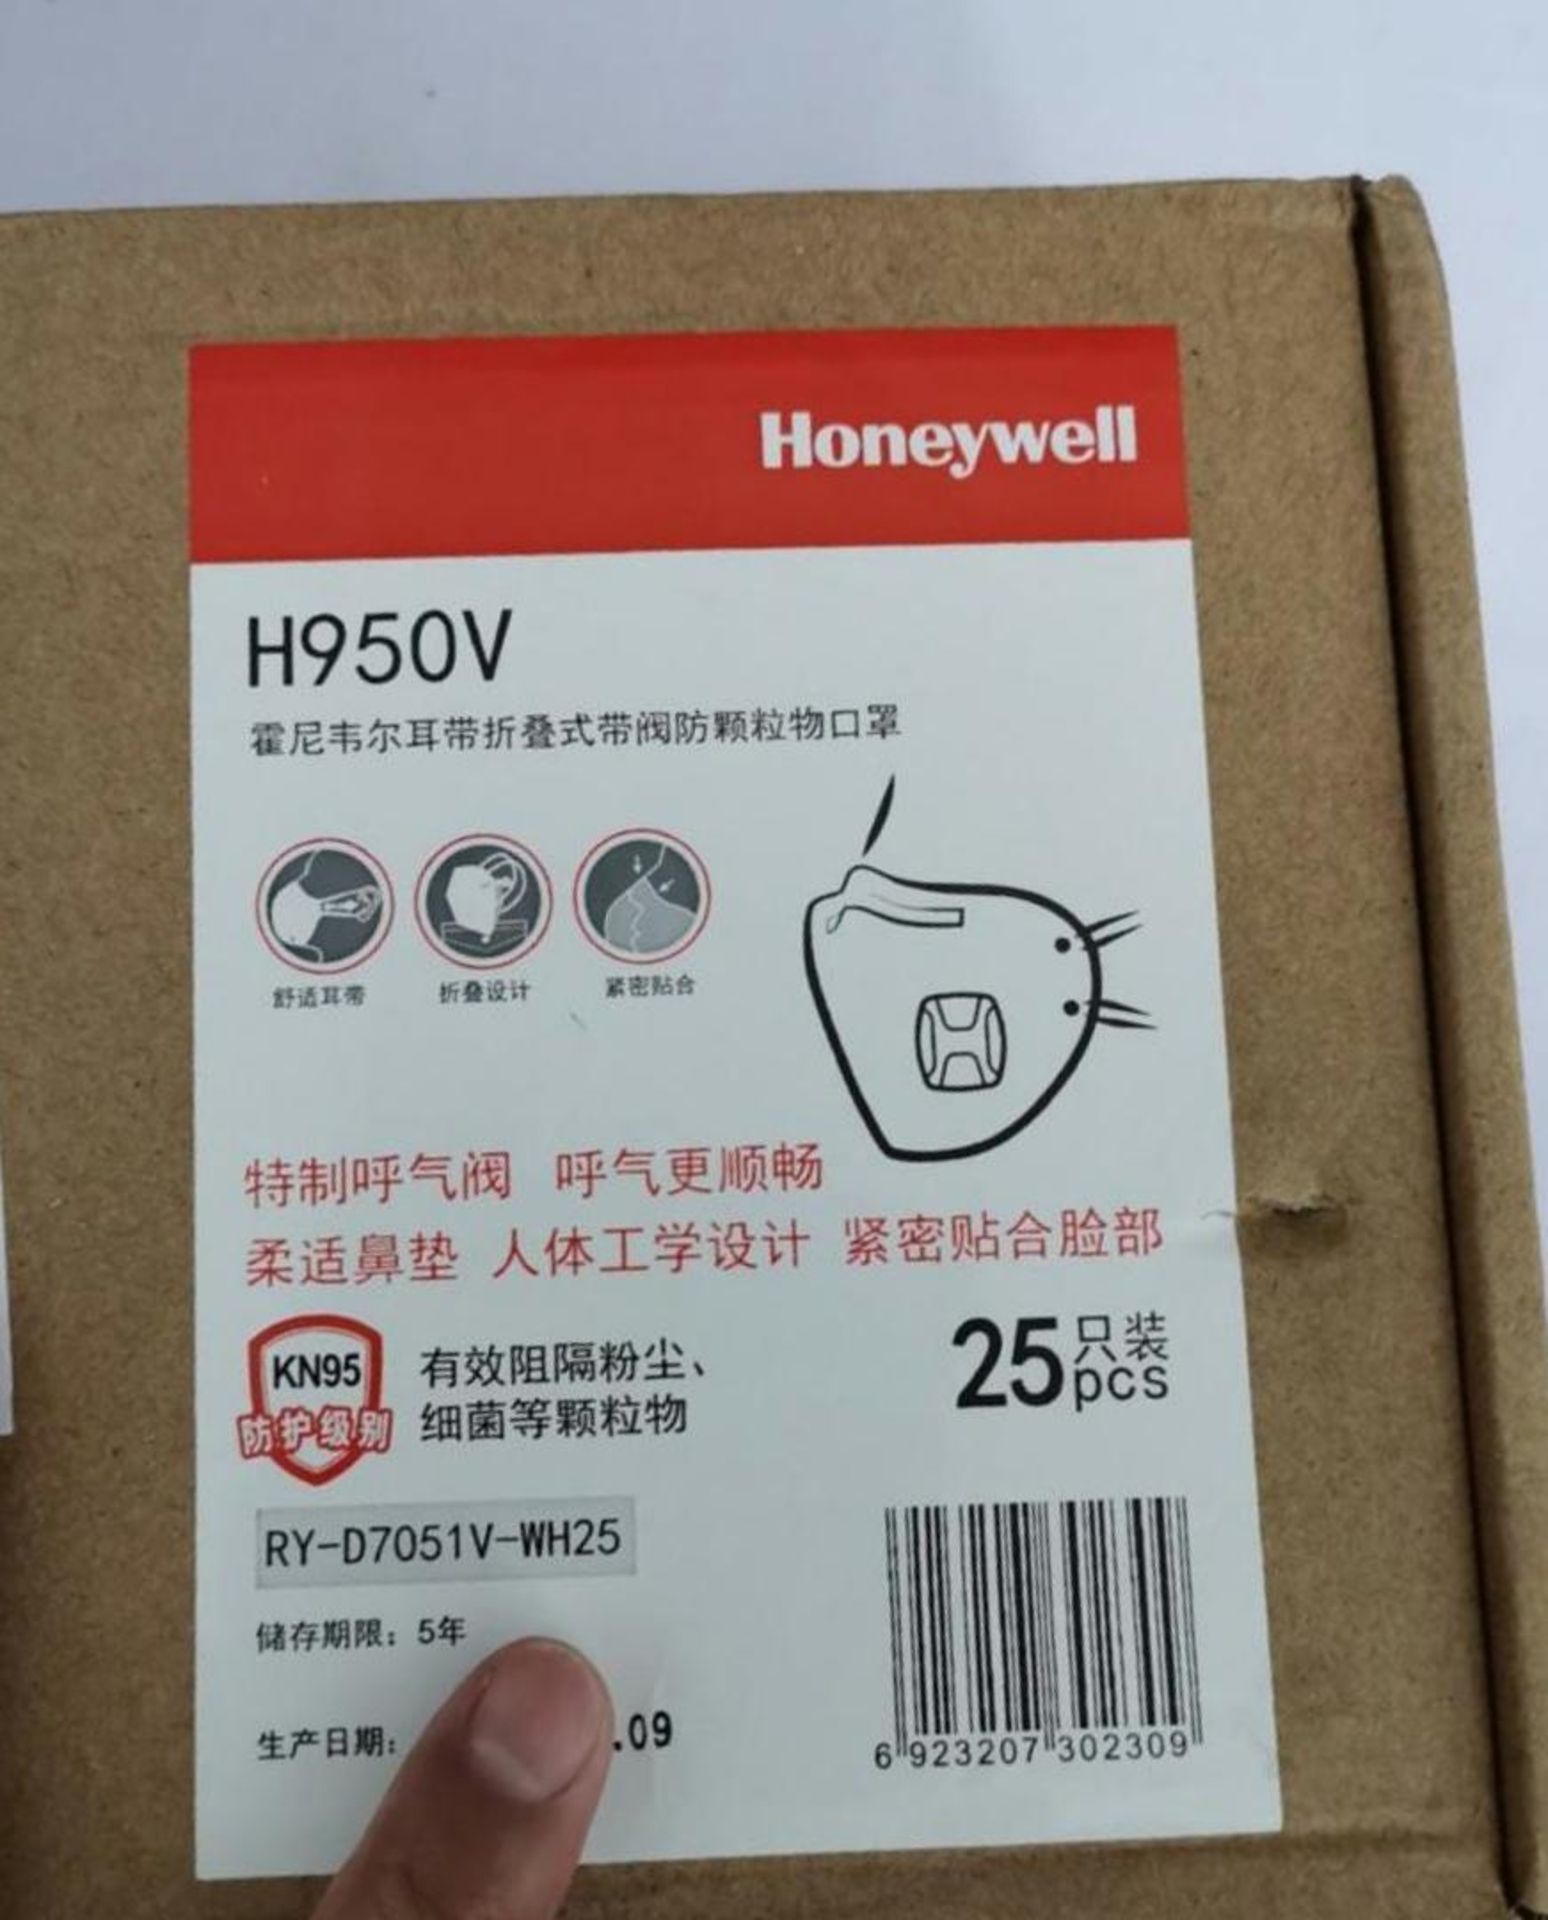 500x Honeywell H950V Protective face mask with valve 25 per box, 20 boxes per carton. - Image 2 of 4